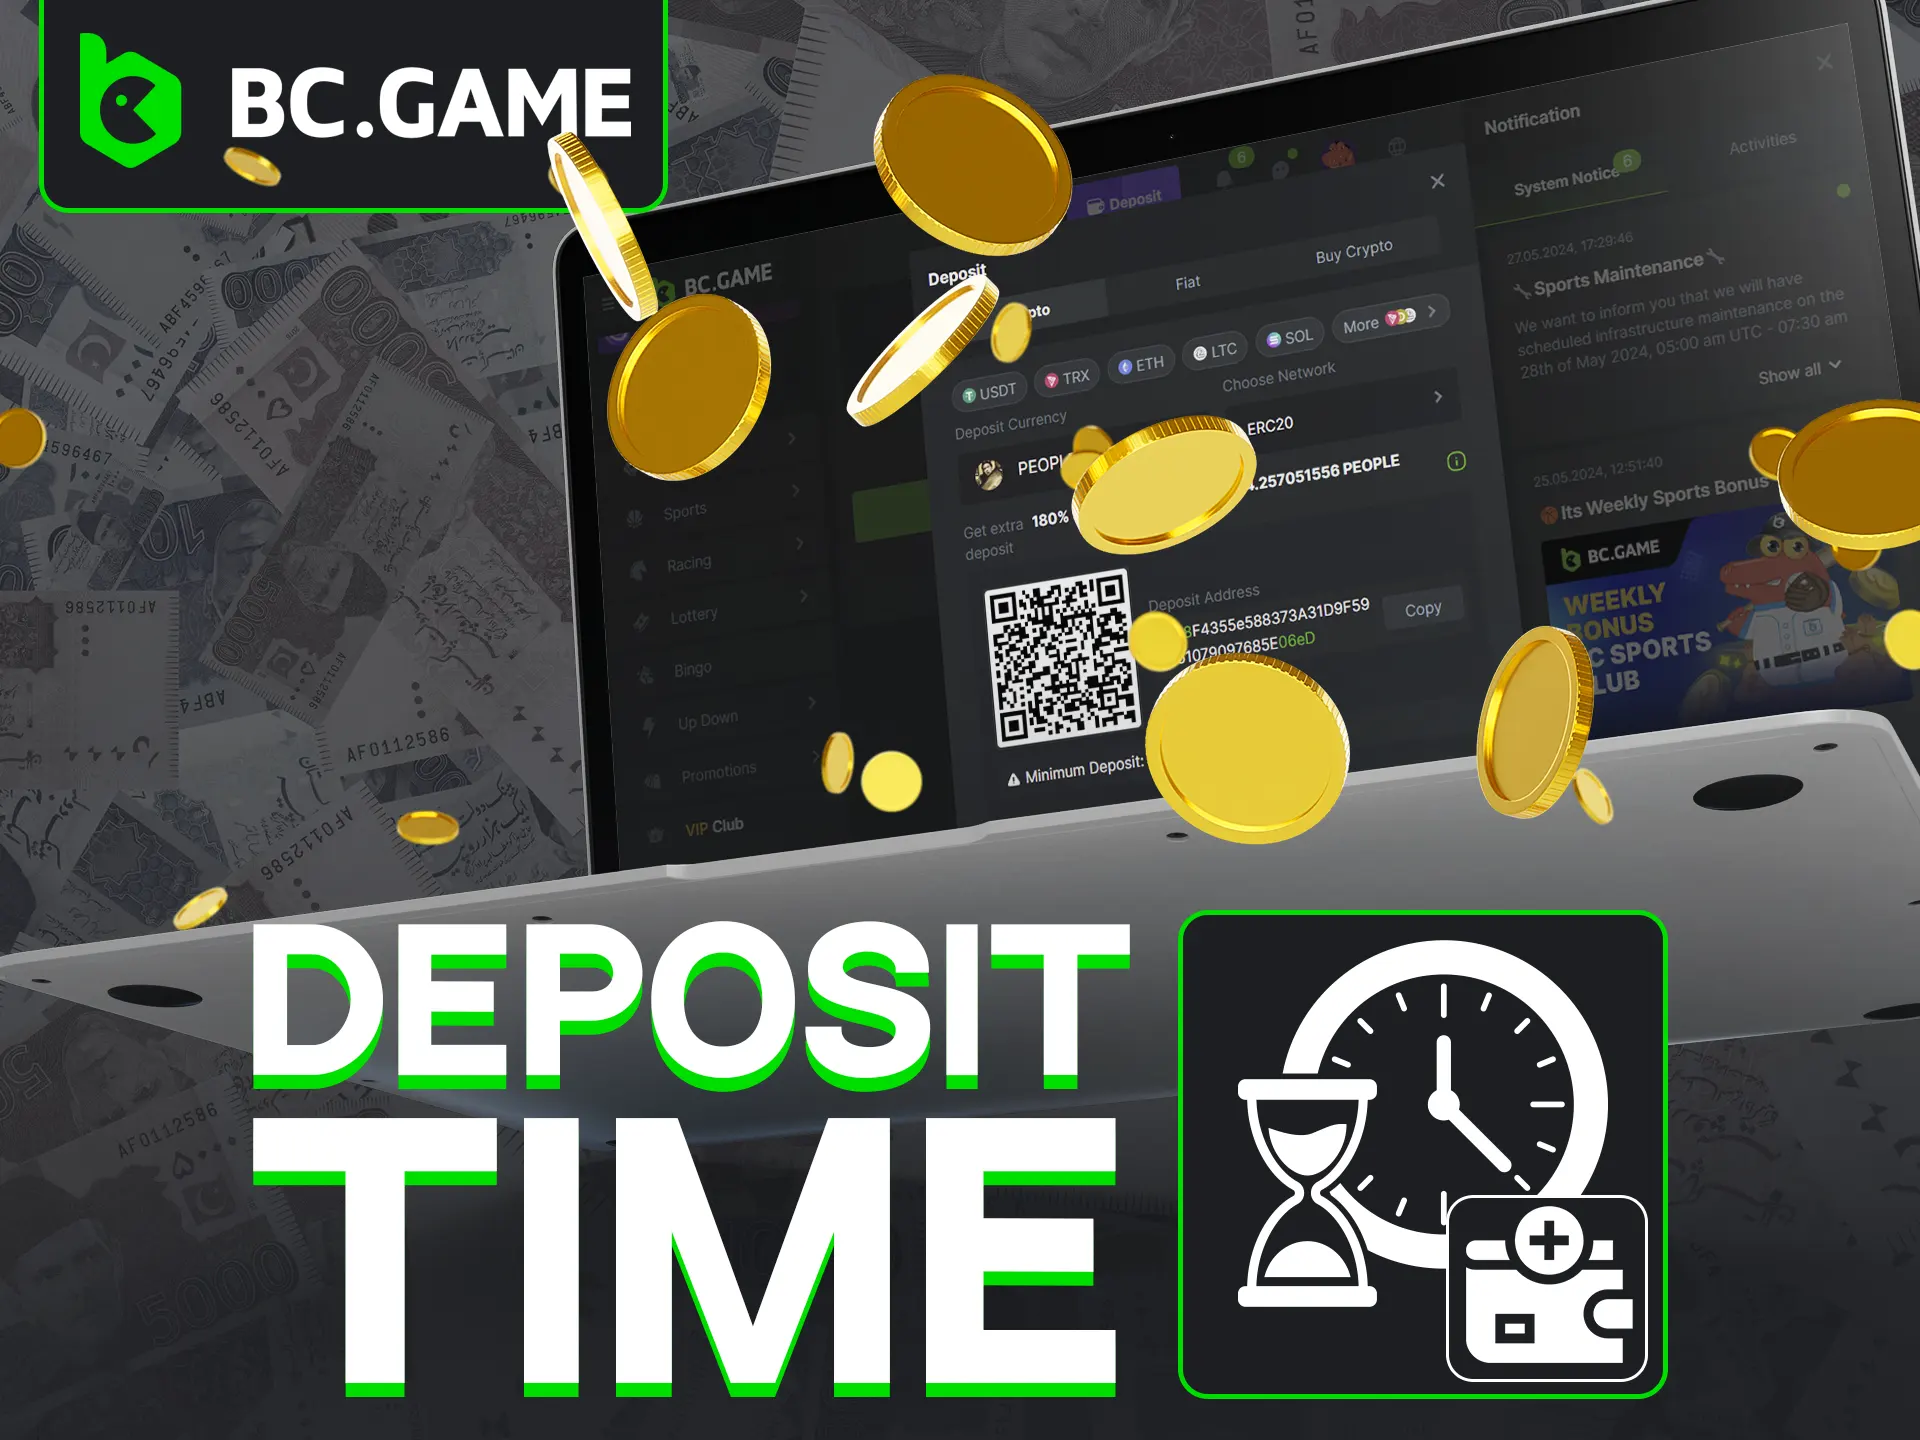 At BC Game deposit time is quick.